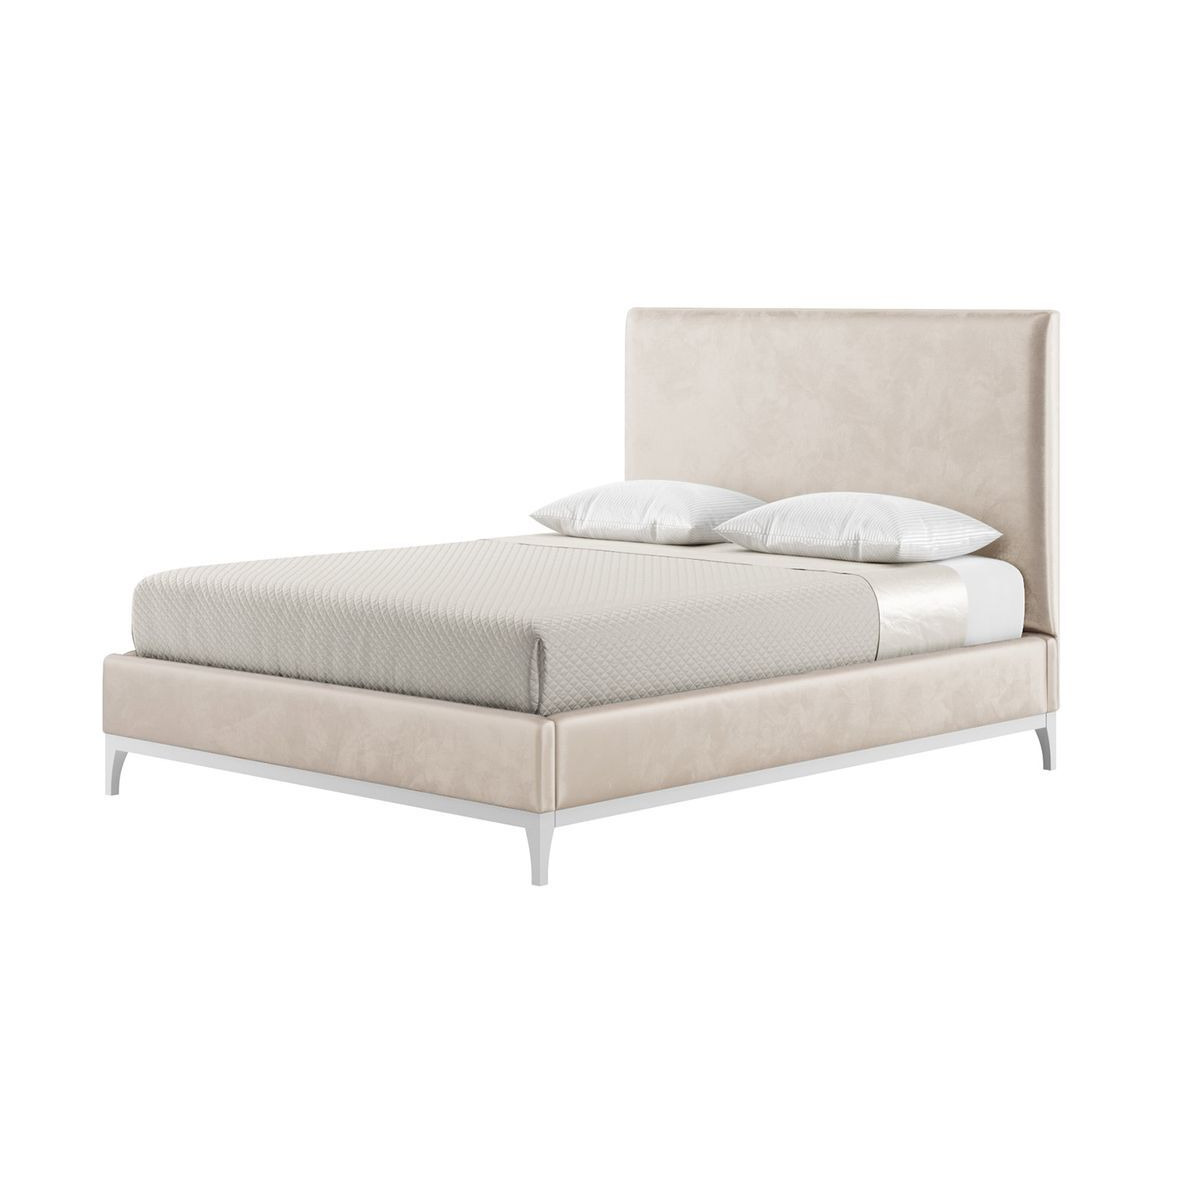 Diane 5ft King Size Bed Frame with modern smooth headboard, light beige, Leg colour: white - image 1